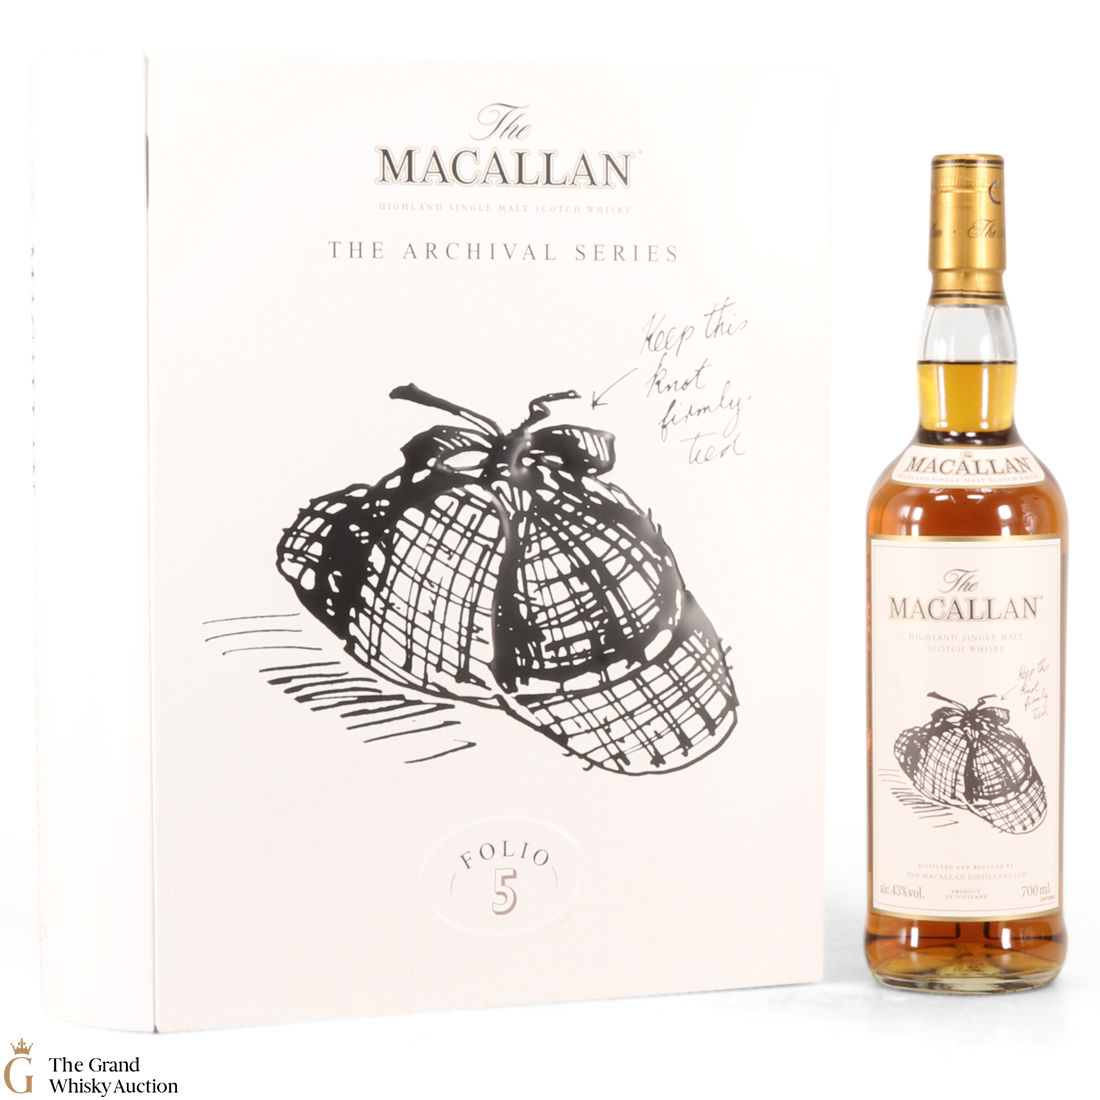 Macallan Folio 5 Auction The Grand Whisky Auction